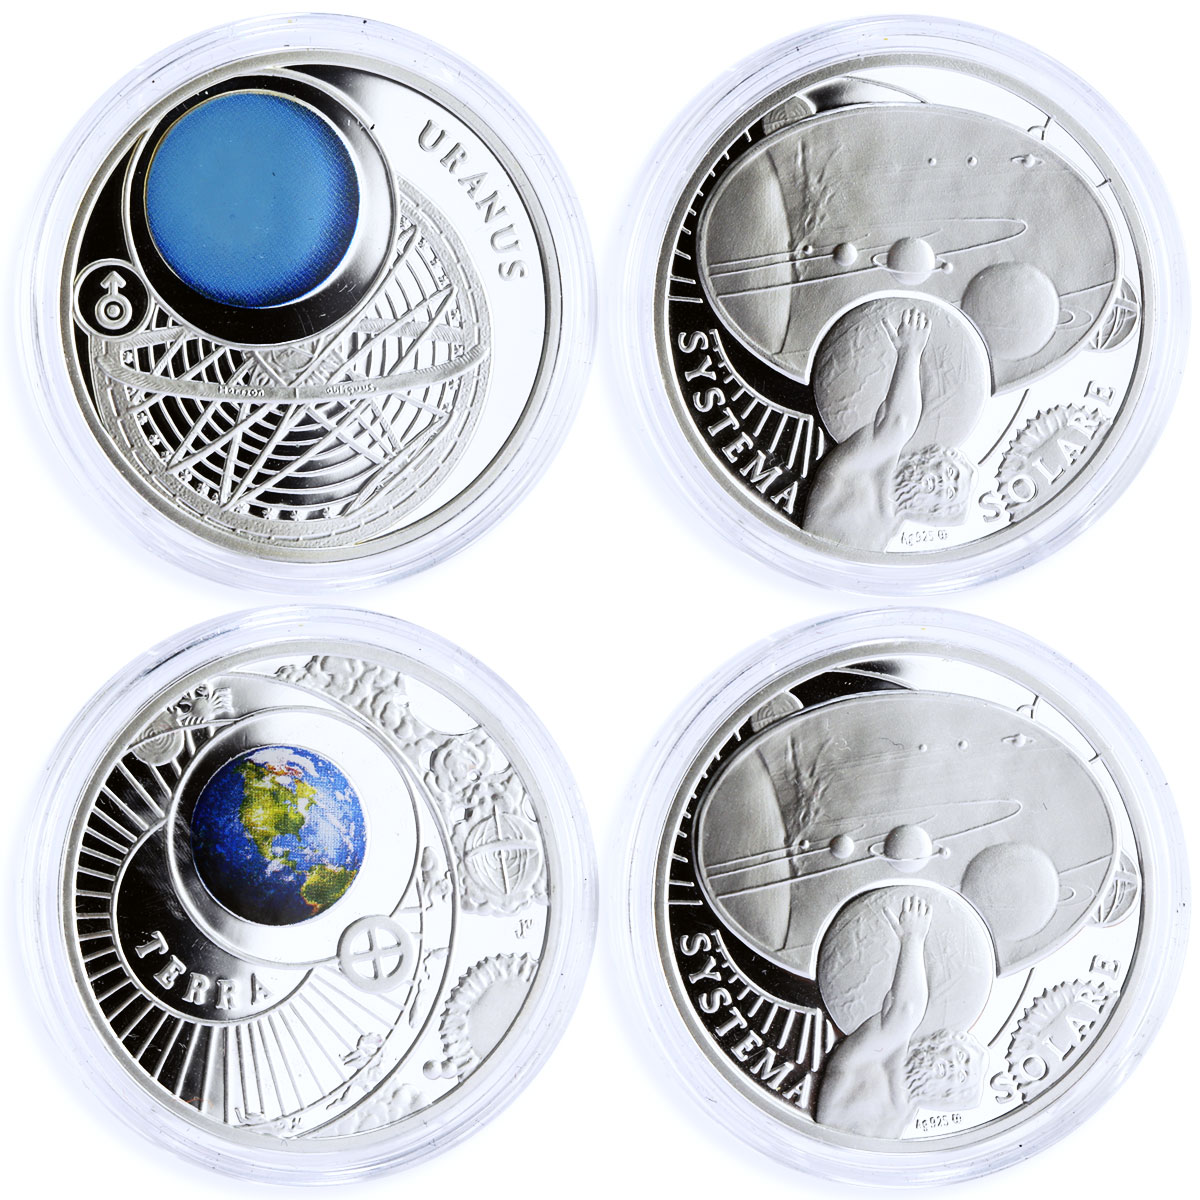 Poland set of 14 tokens Systema Solare Solar System Galaxy silver tokens 2009